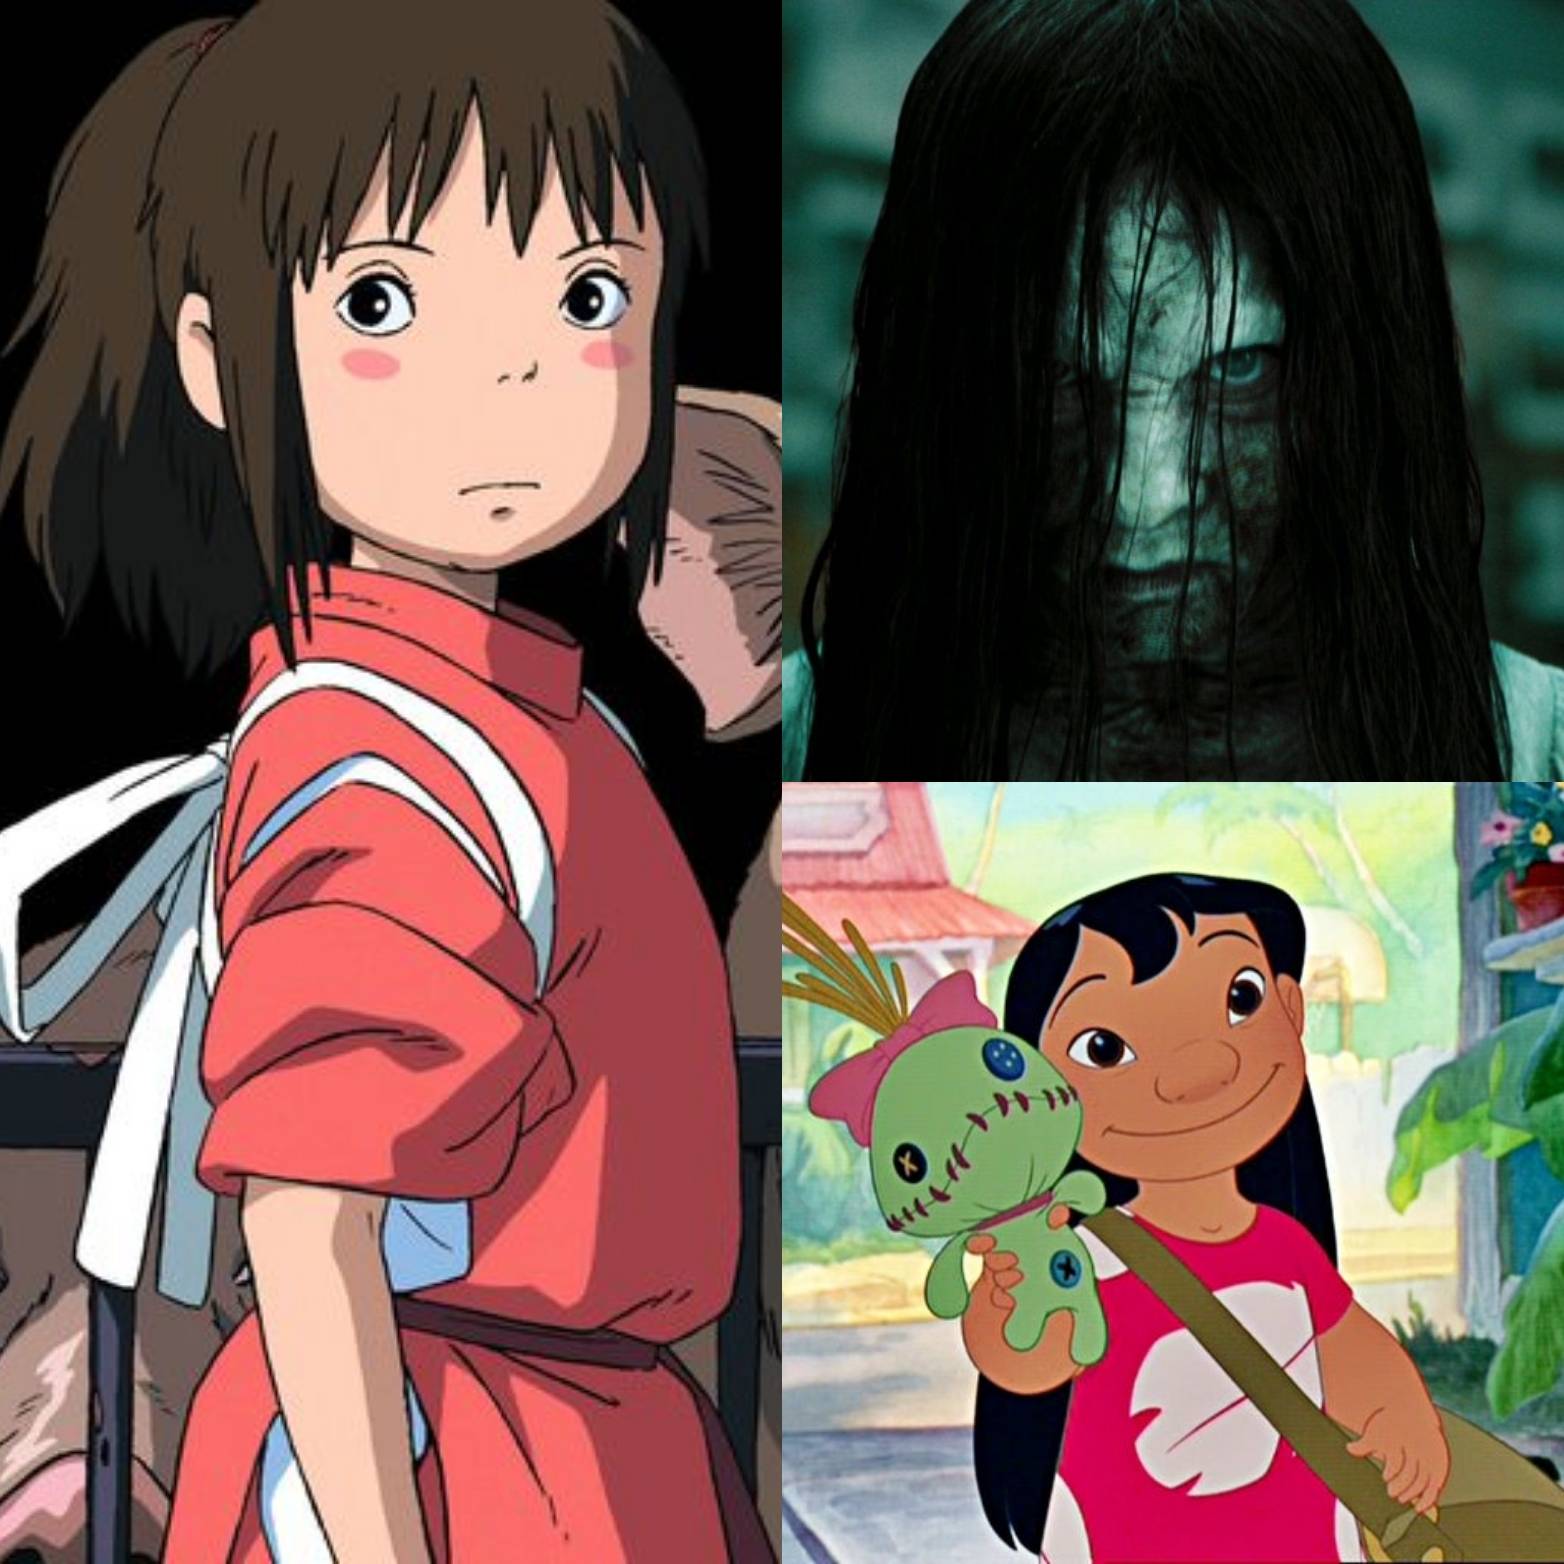 Saboten Con on Twitter: "#FridayFactoid The English actress for Chihiro in Spirited Away, Daveigh Chase, also voiced Lilo from Lilo and Stitch as well as Samara Morgan in The Ring. https://t.co/Y96Q4lZ9NH" /